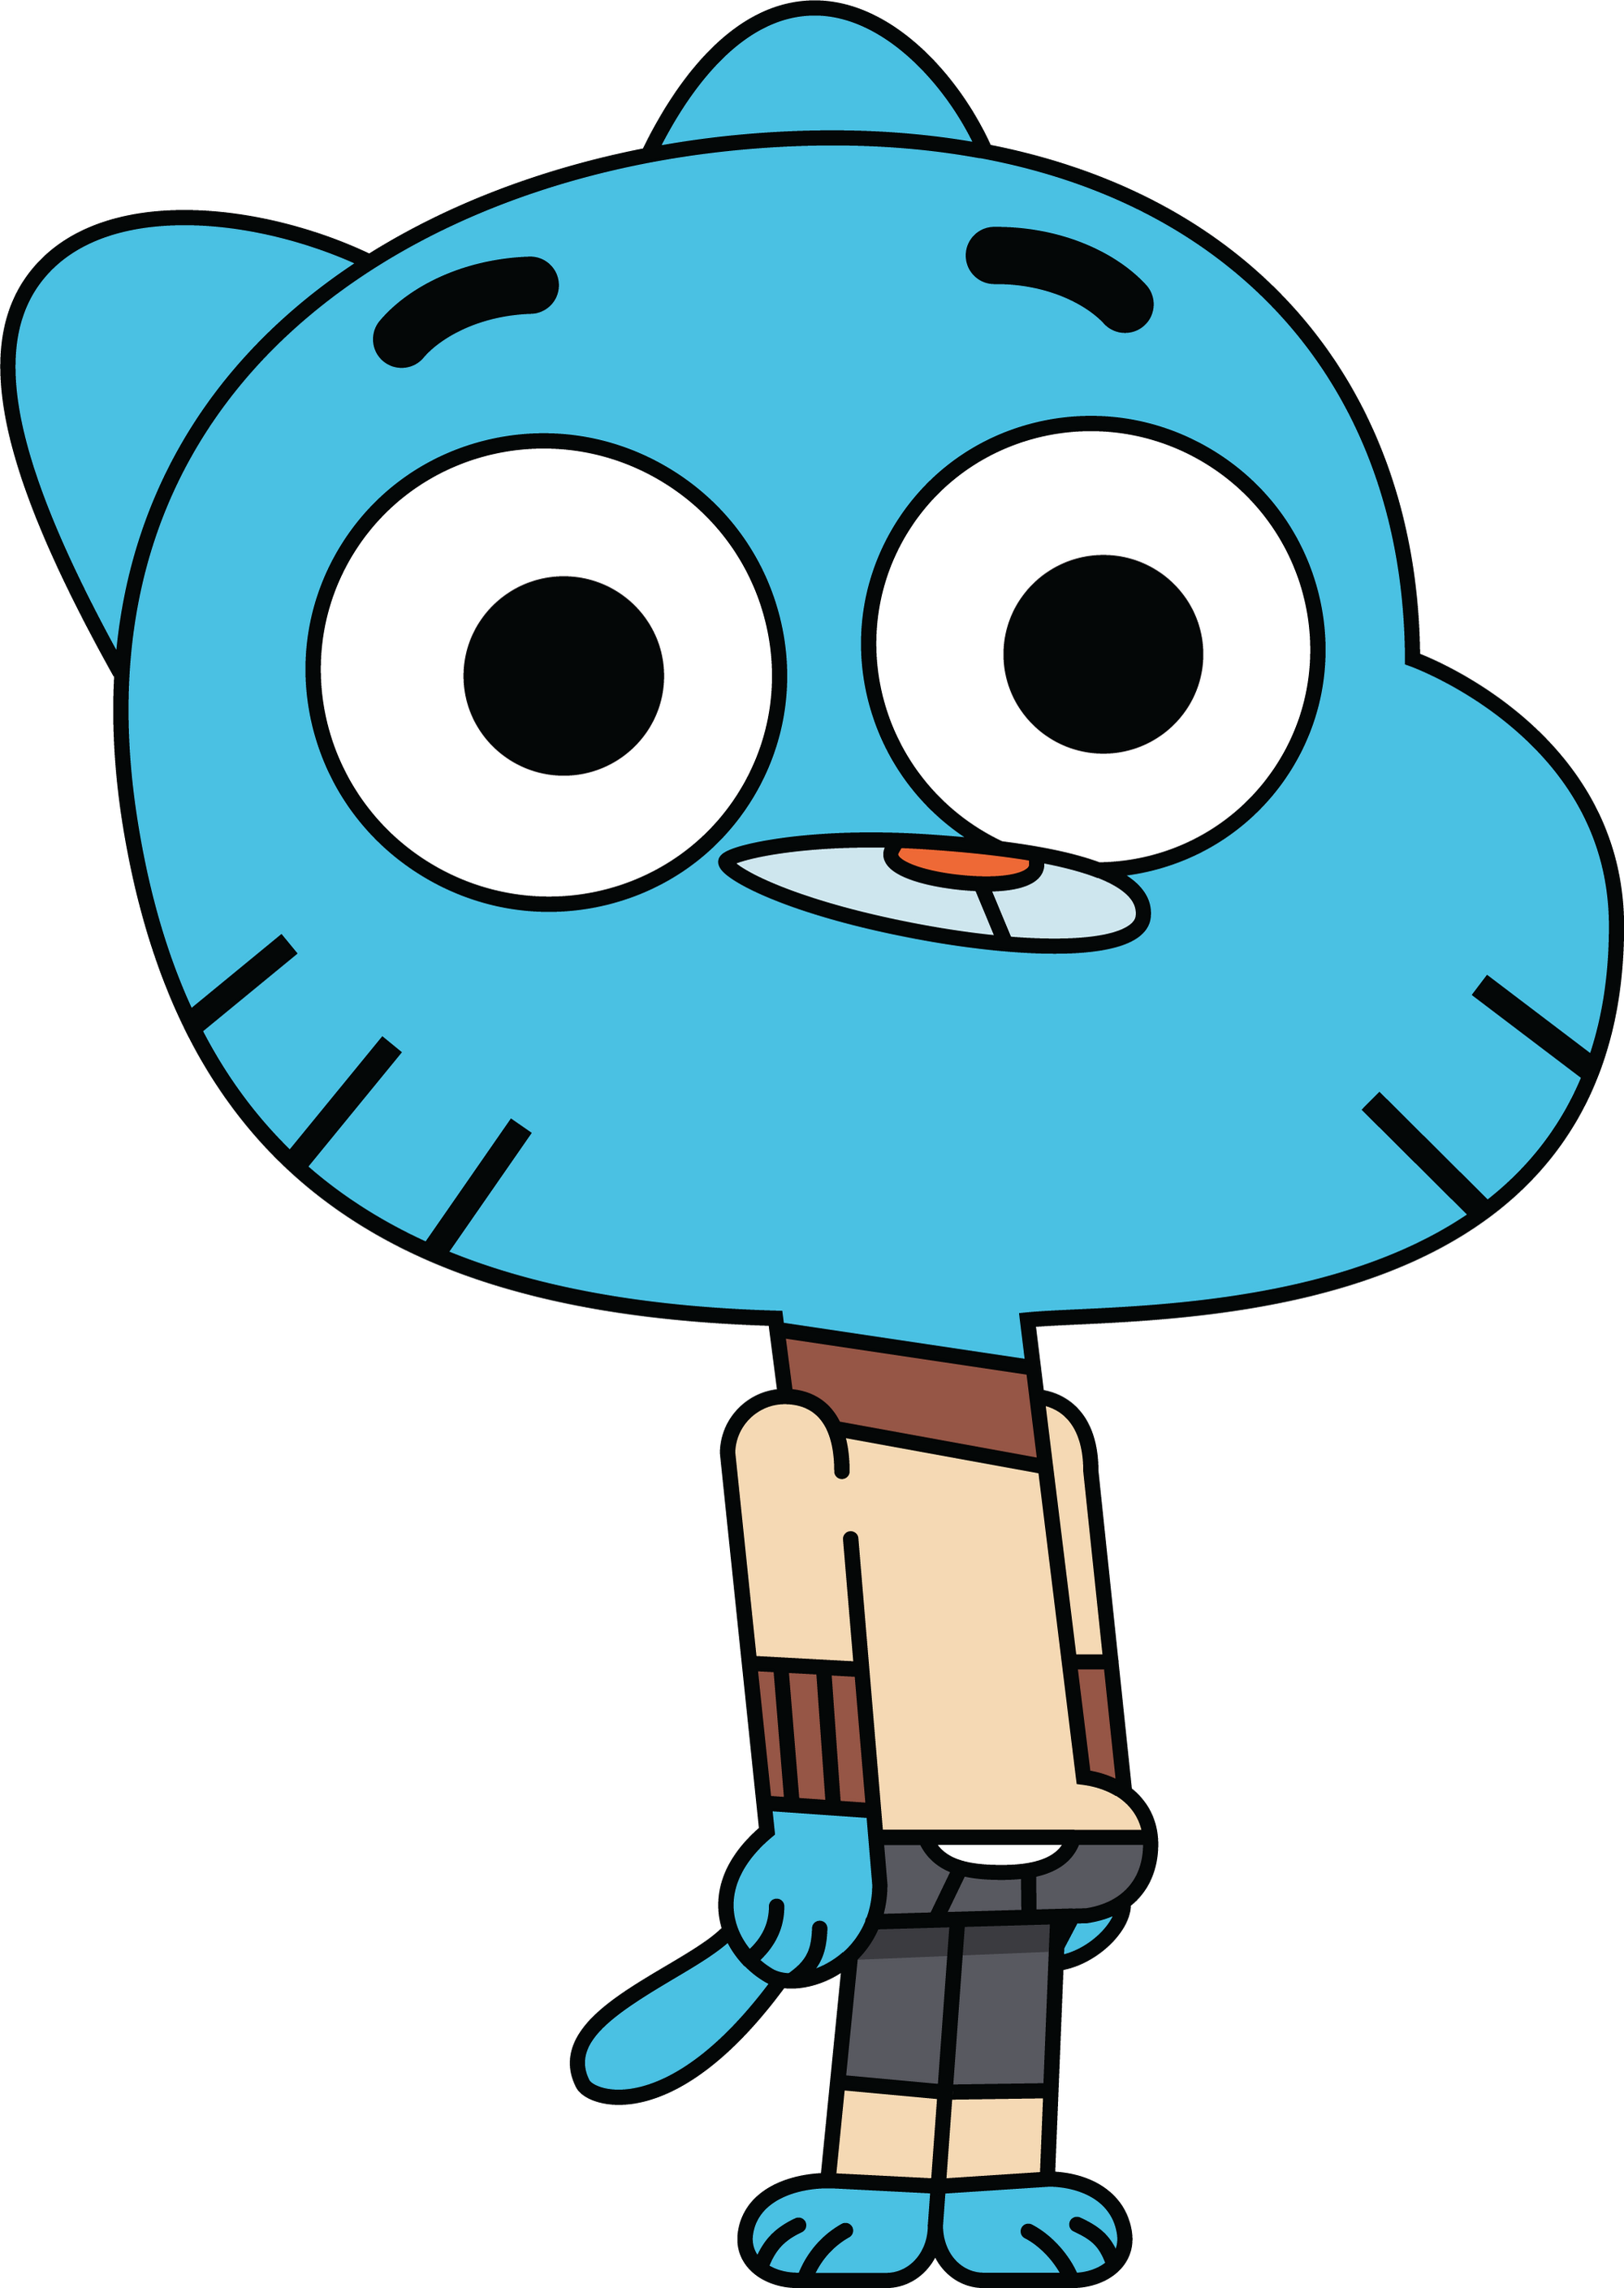 Gumball Watterson The Amazing World Of Gumball Wiki Fandom Powered By Wikia